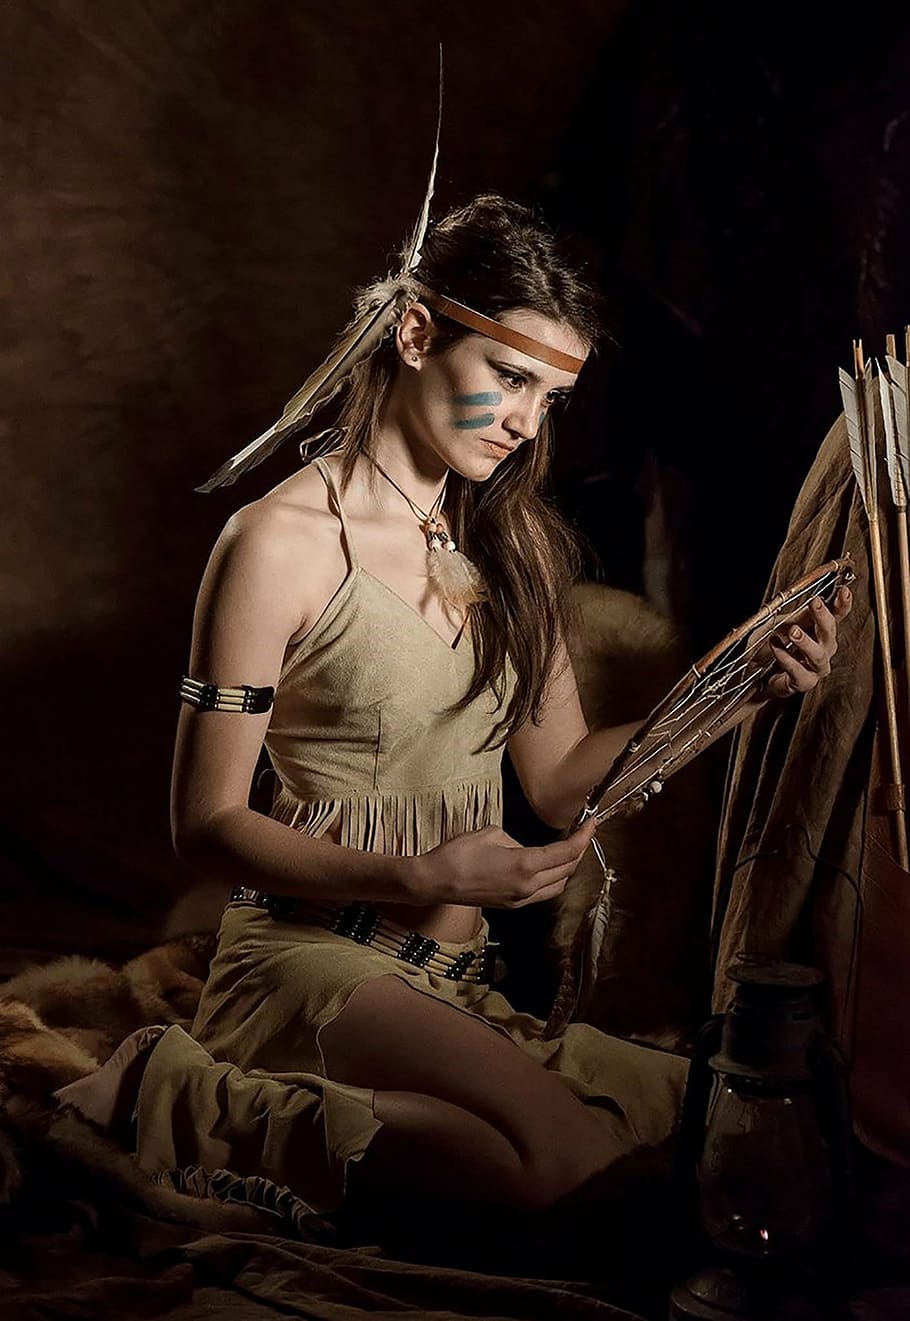 native, american woman, holding, dreamcatcher, model, costume, disguise, music, musical instrument, only women